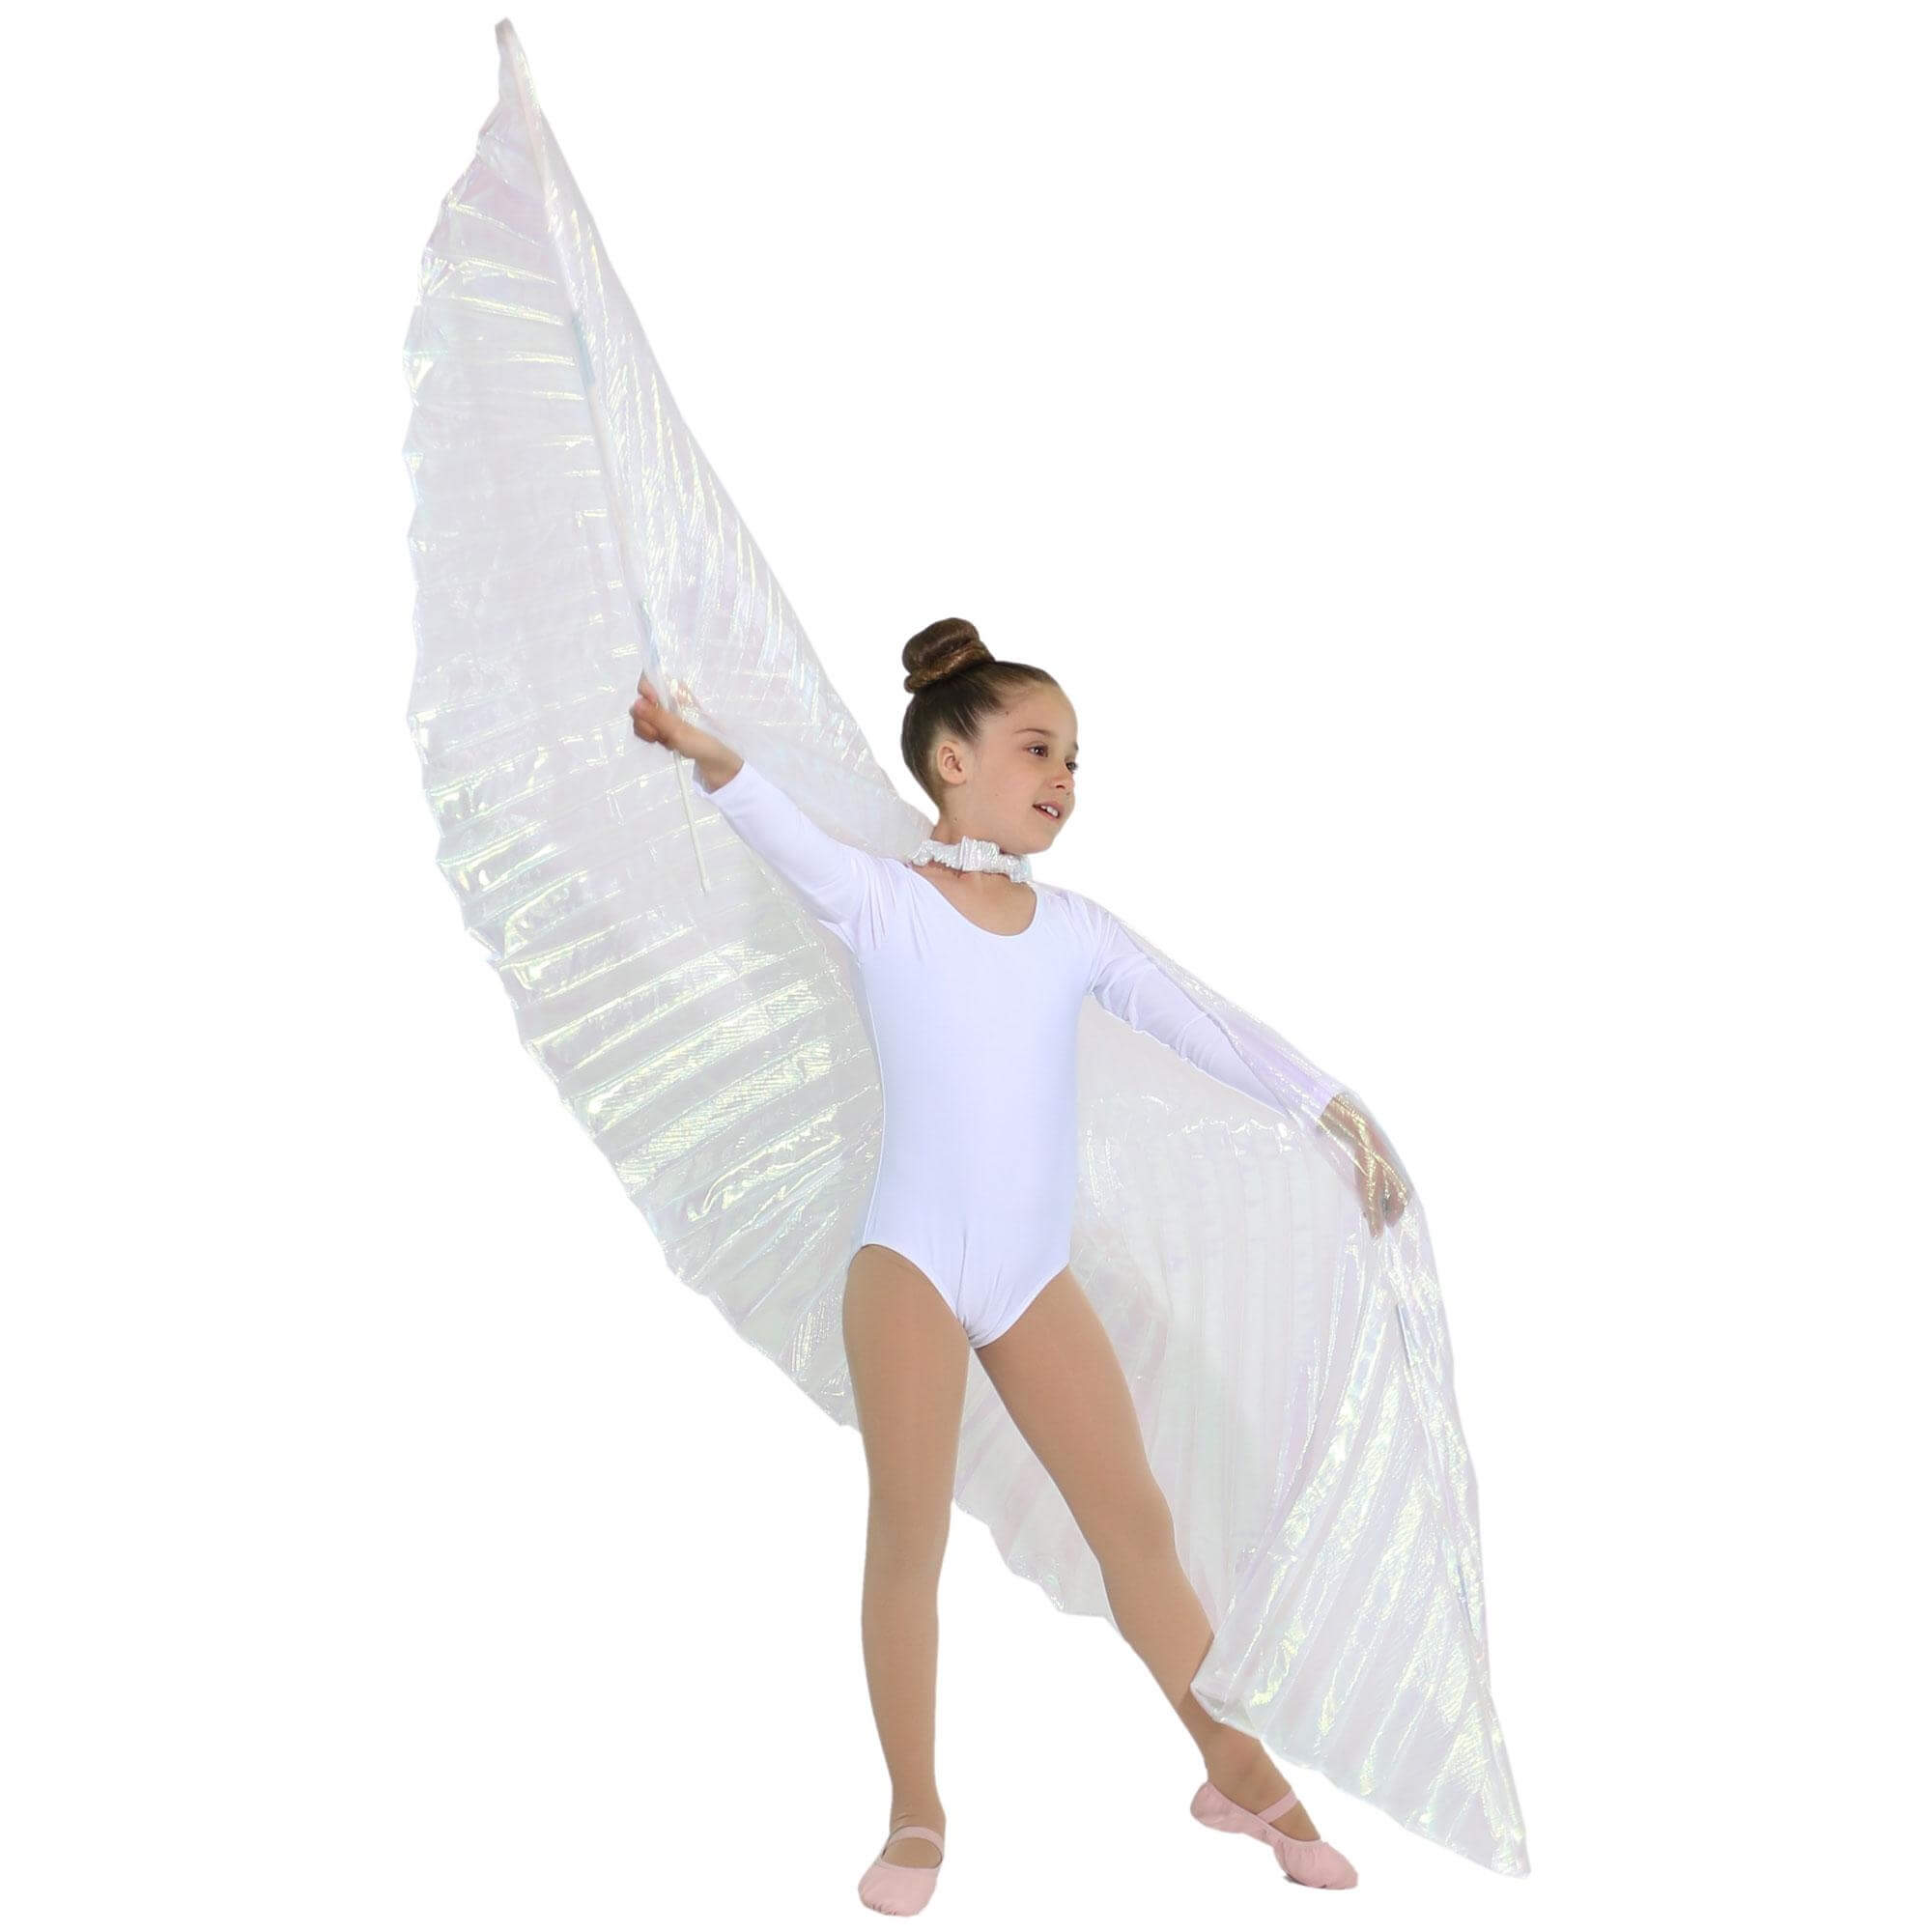 Iridescent White Worship Angel Wing - Click Image to Close